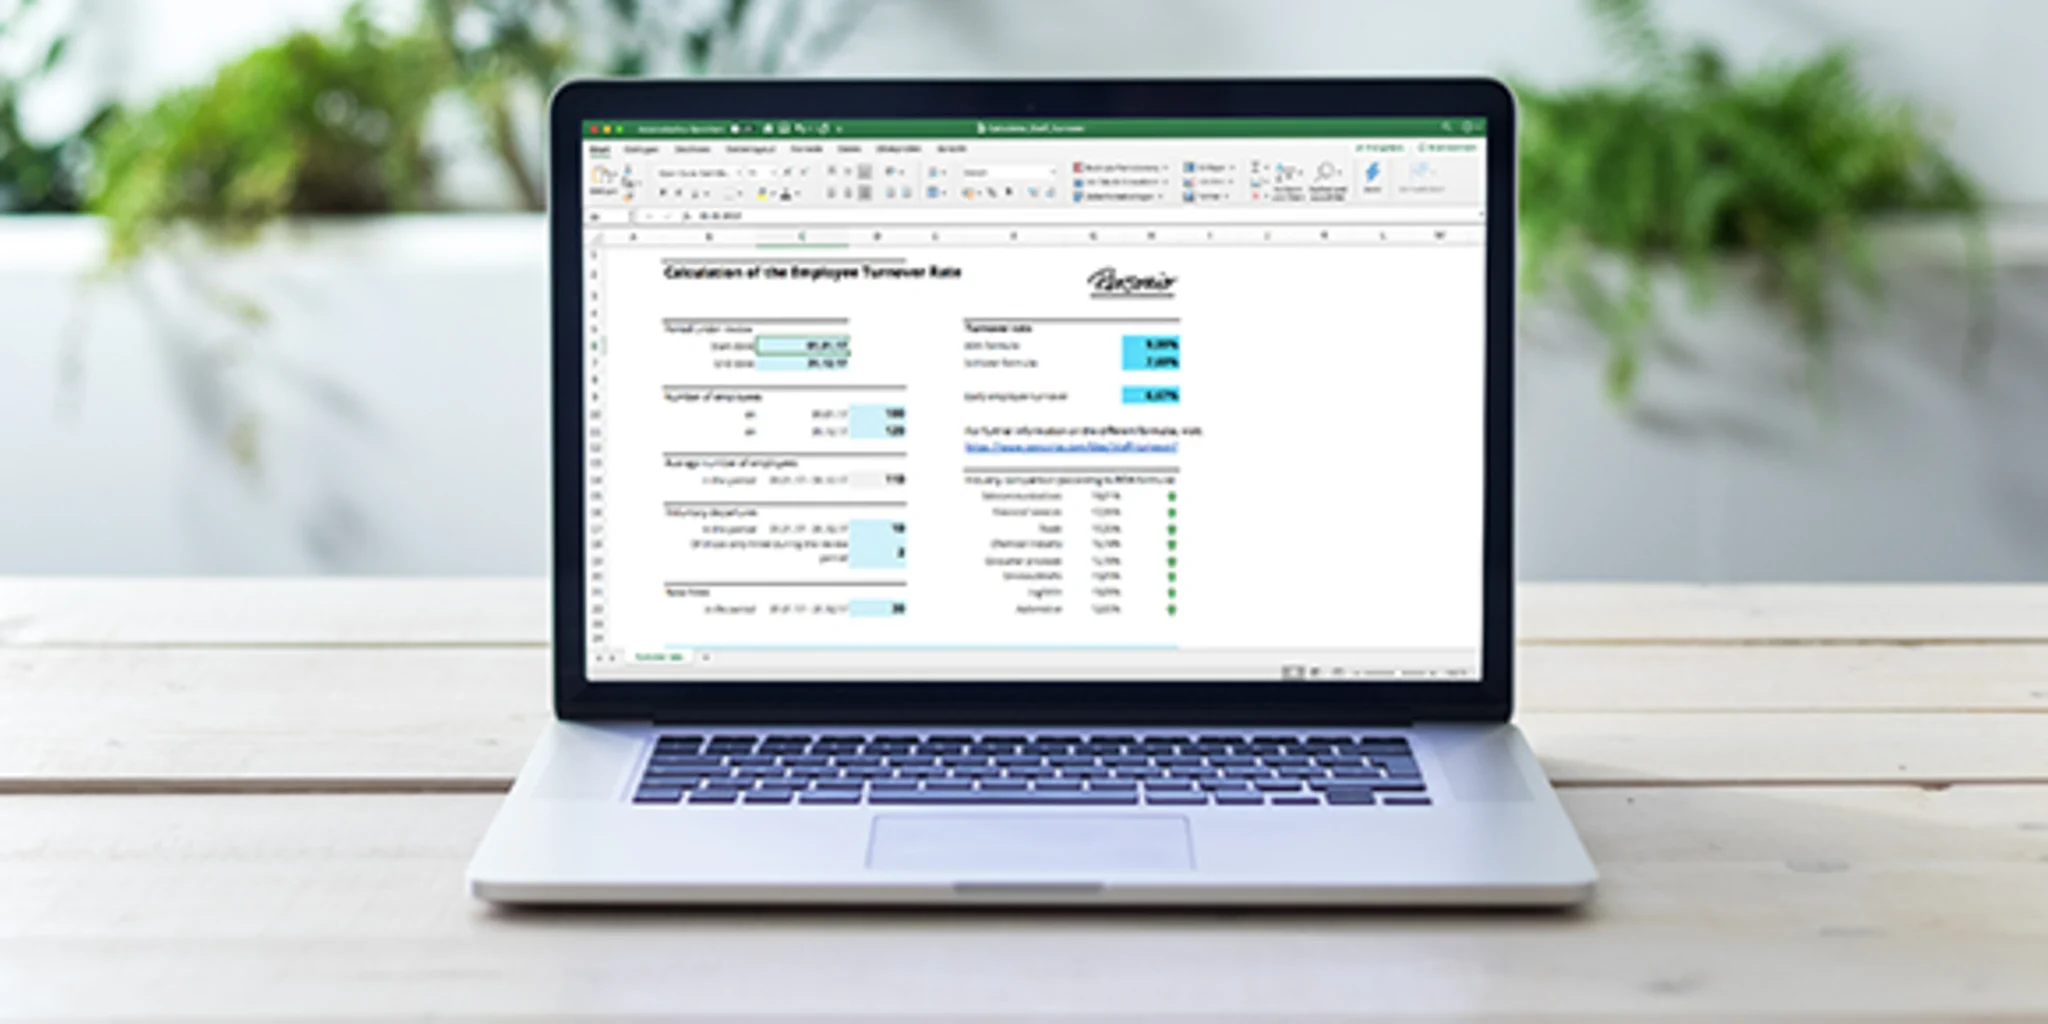 Download our Excel template to take your calculations with you.